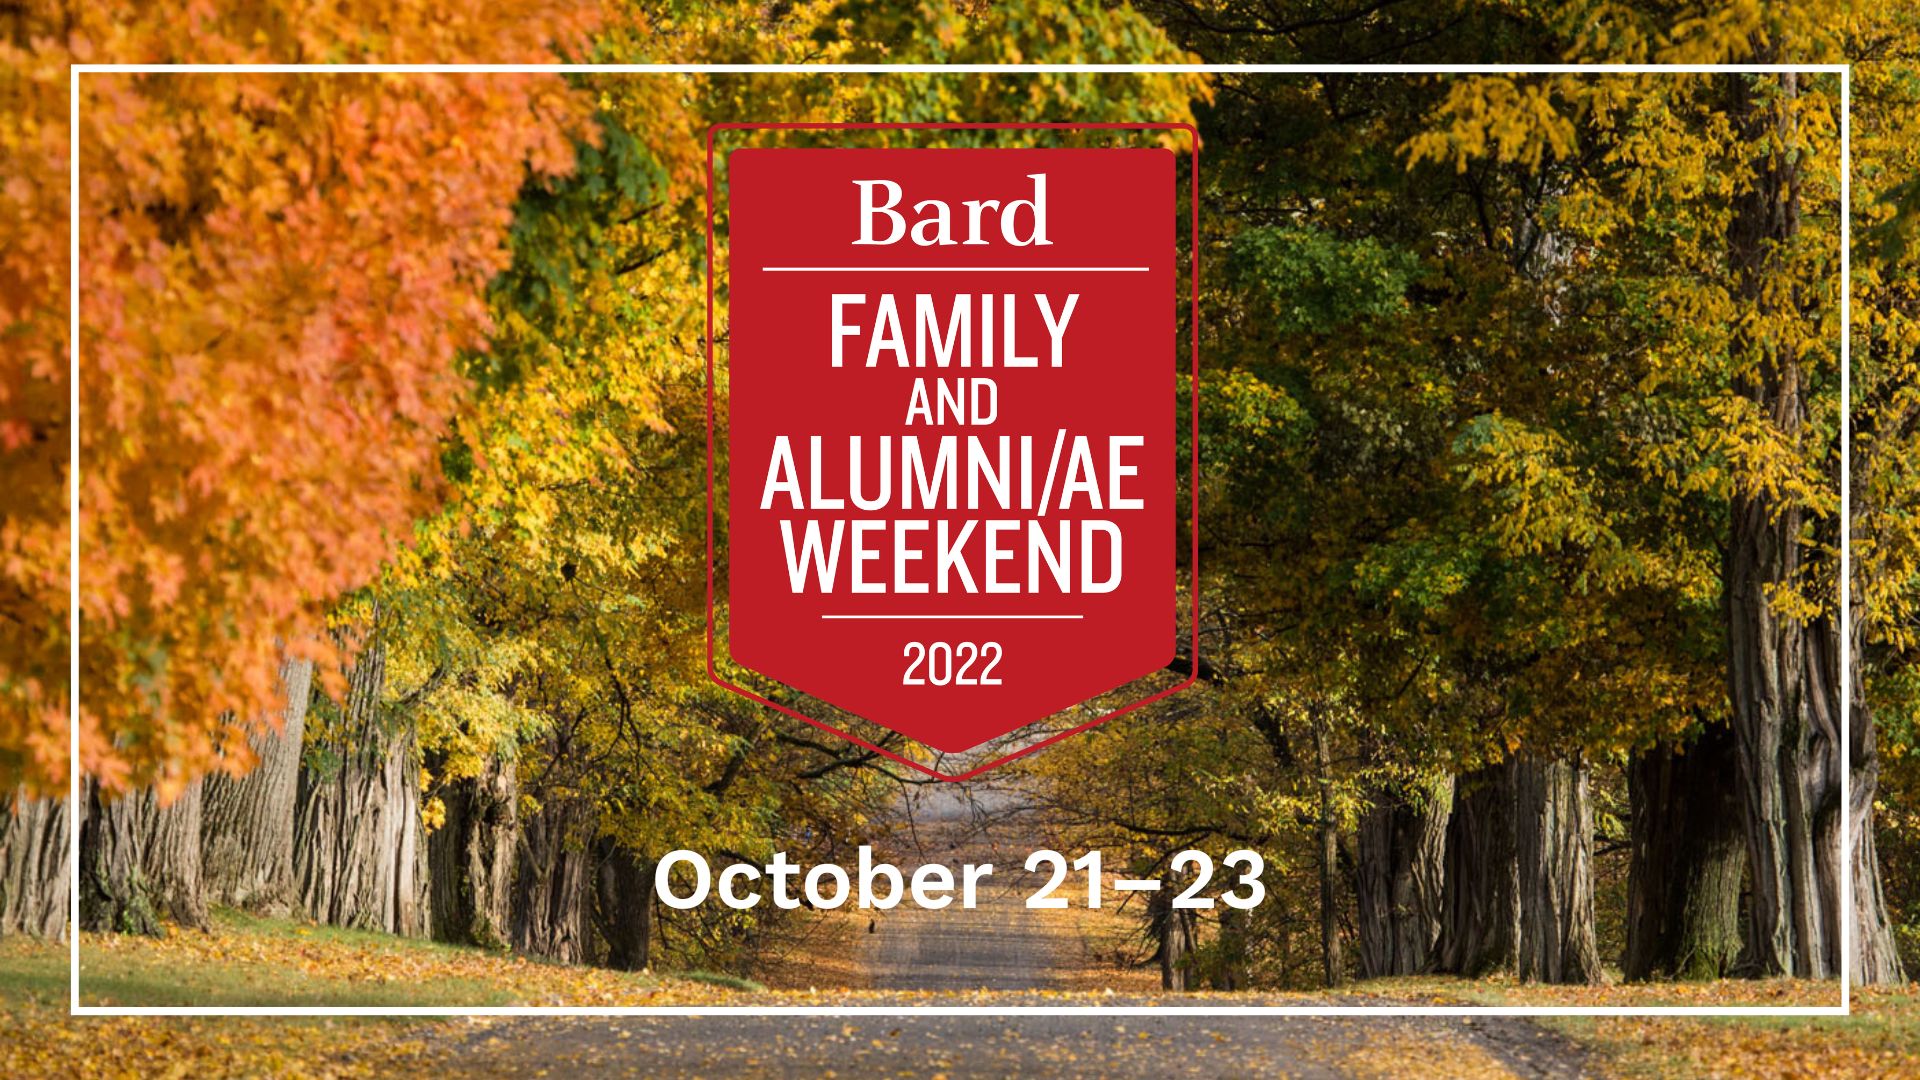 [Family and Alumni/ae Weekend] 